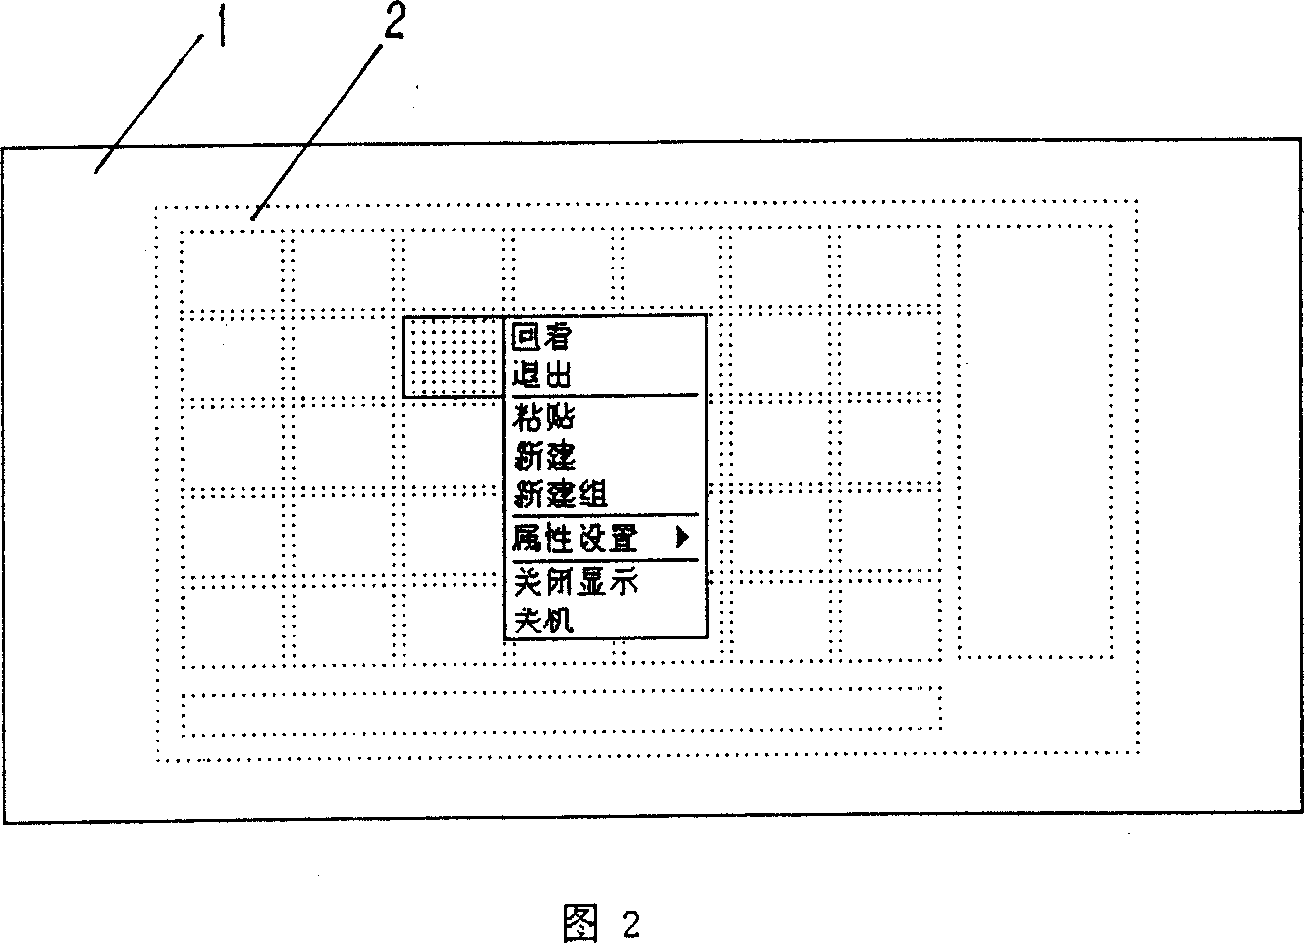 Method for audio-visual remote control of digital television display screen user interface